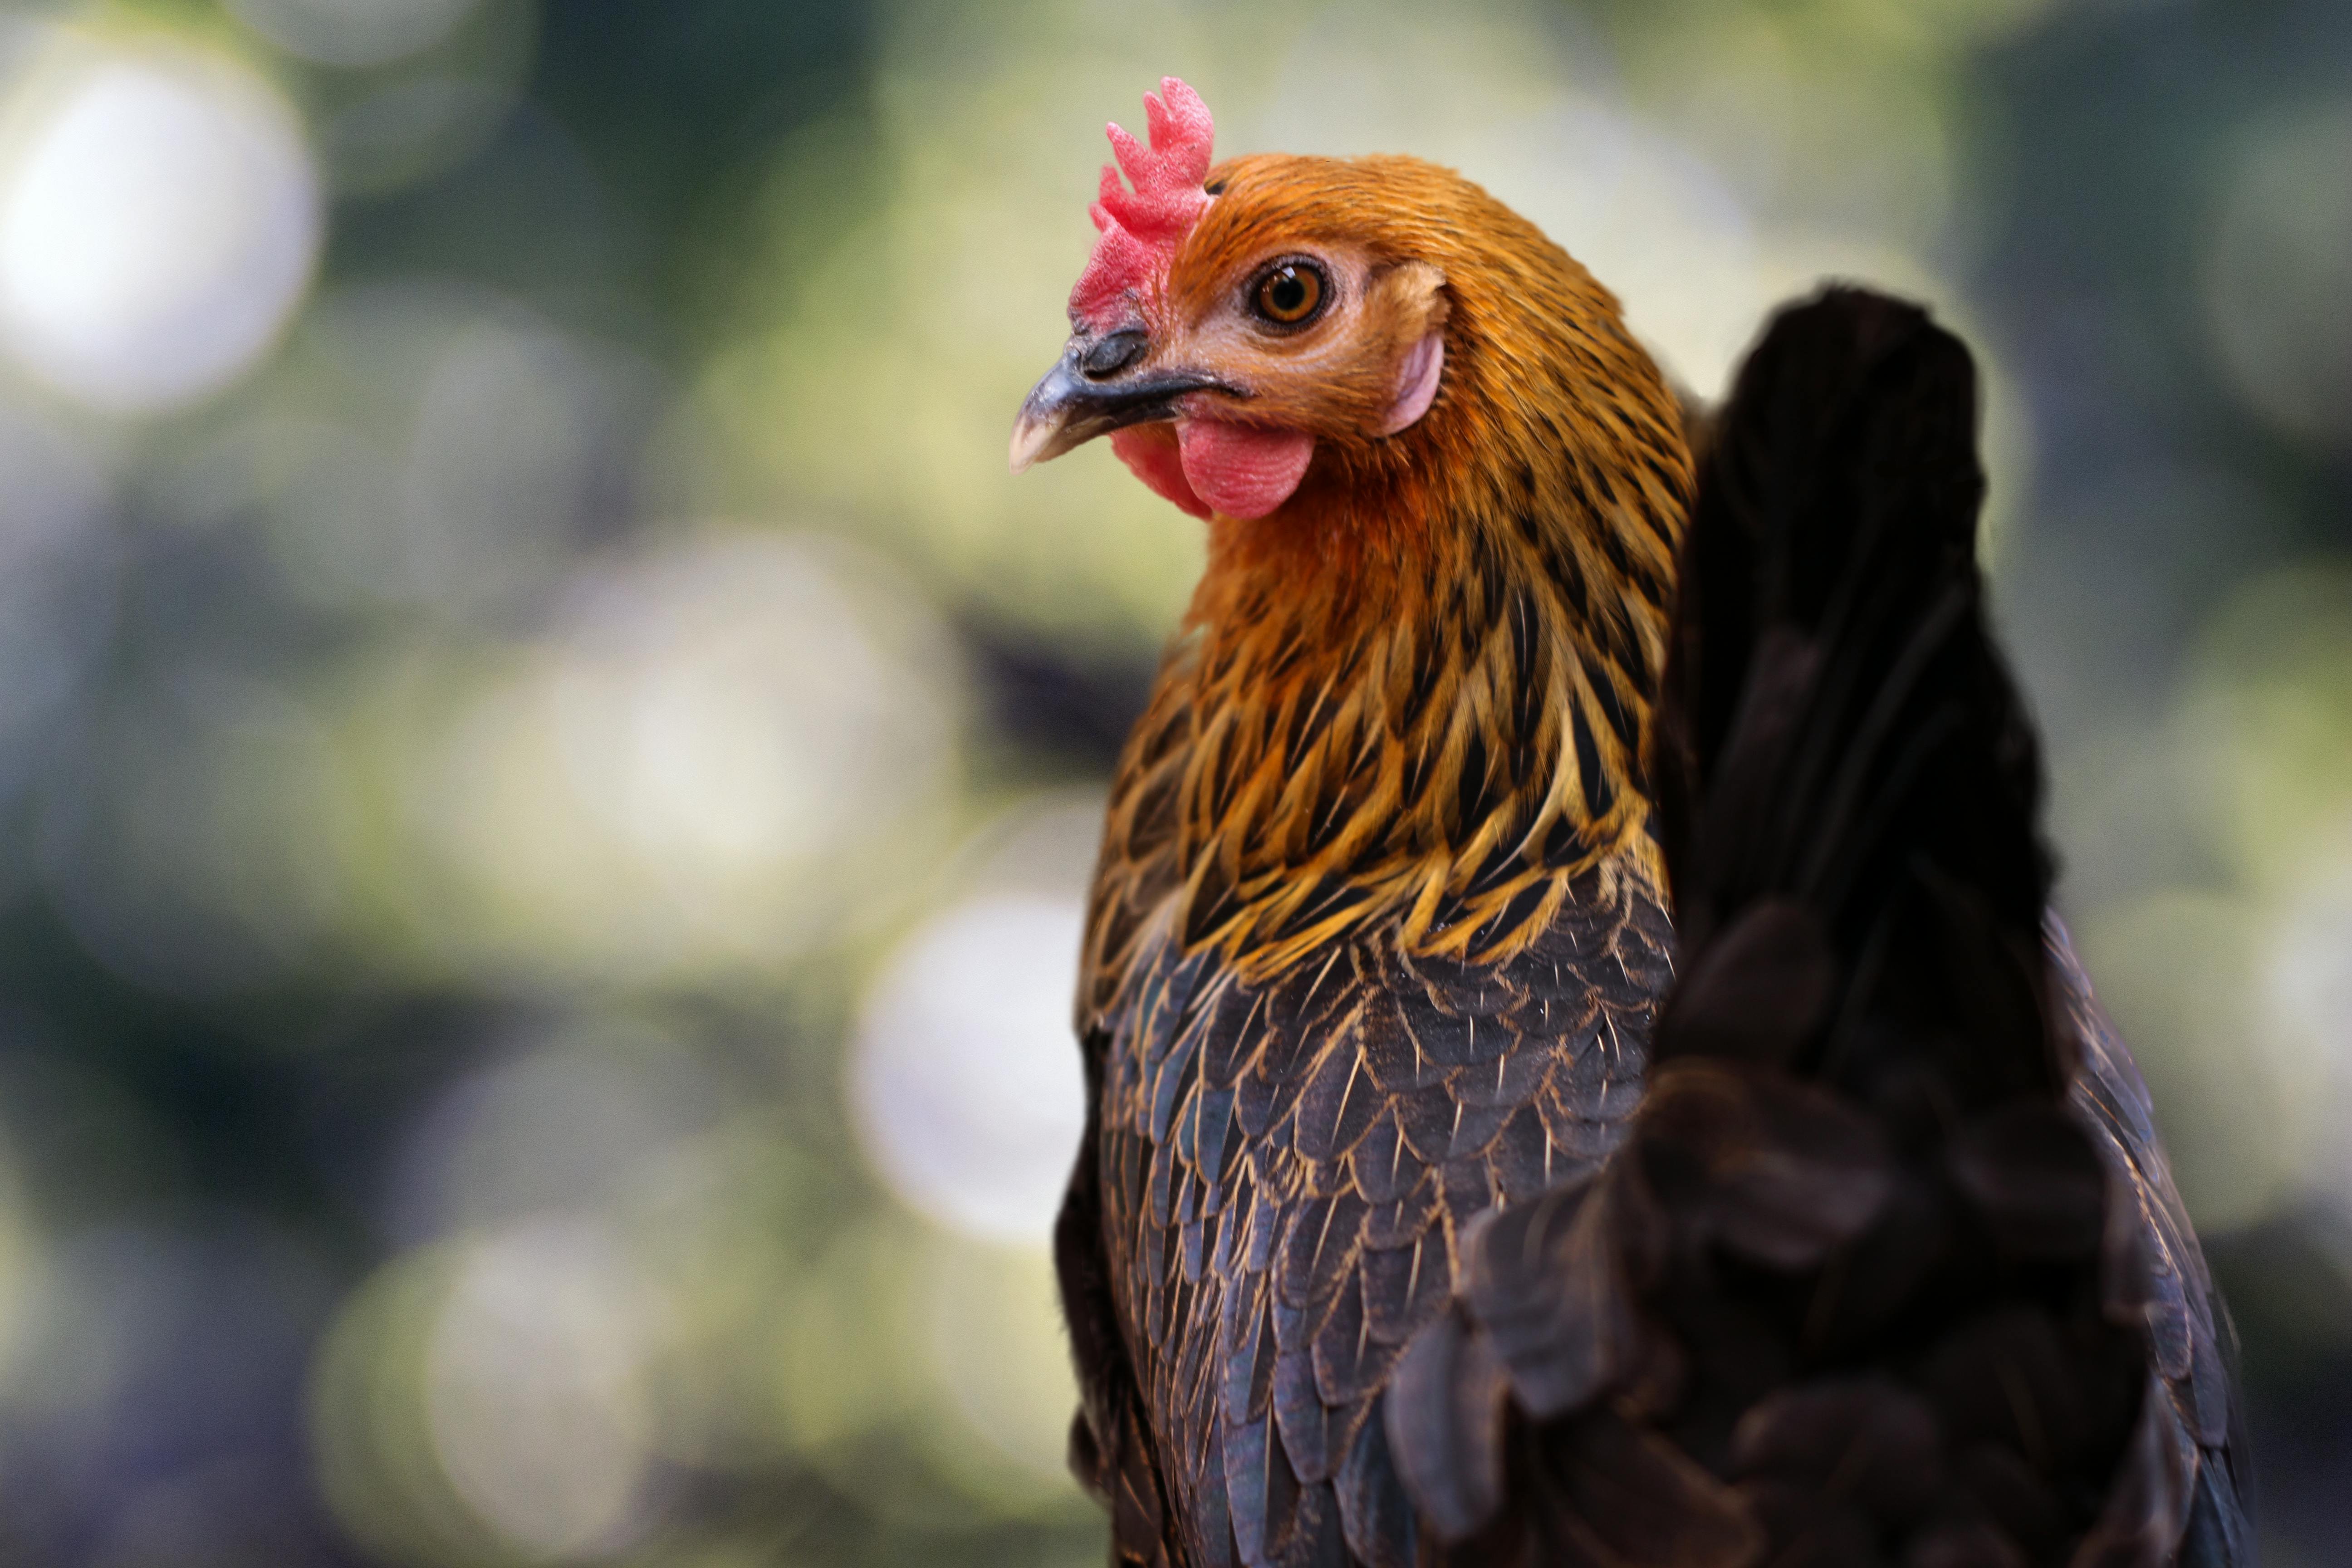 Close-Up Photo Of Chicken · Free Stock Photo